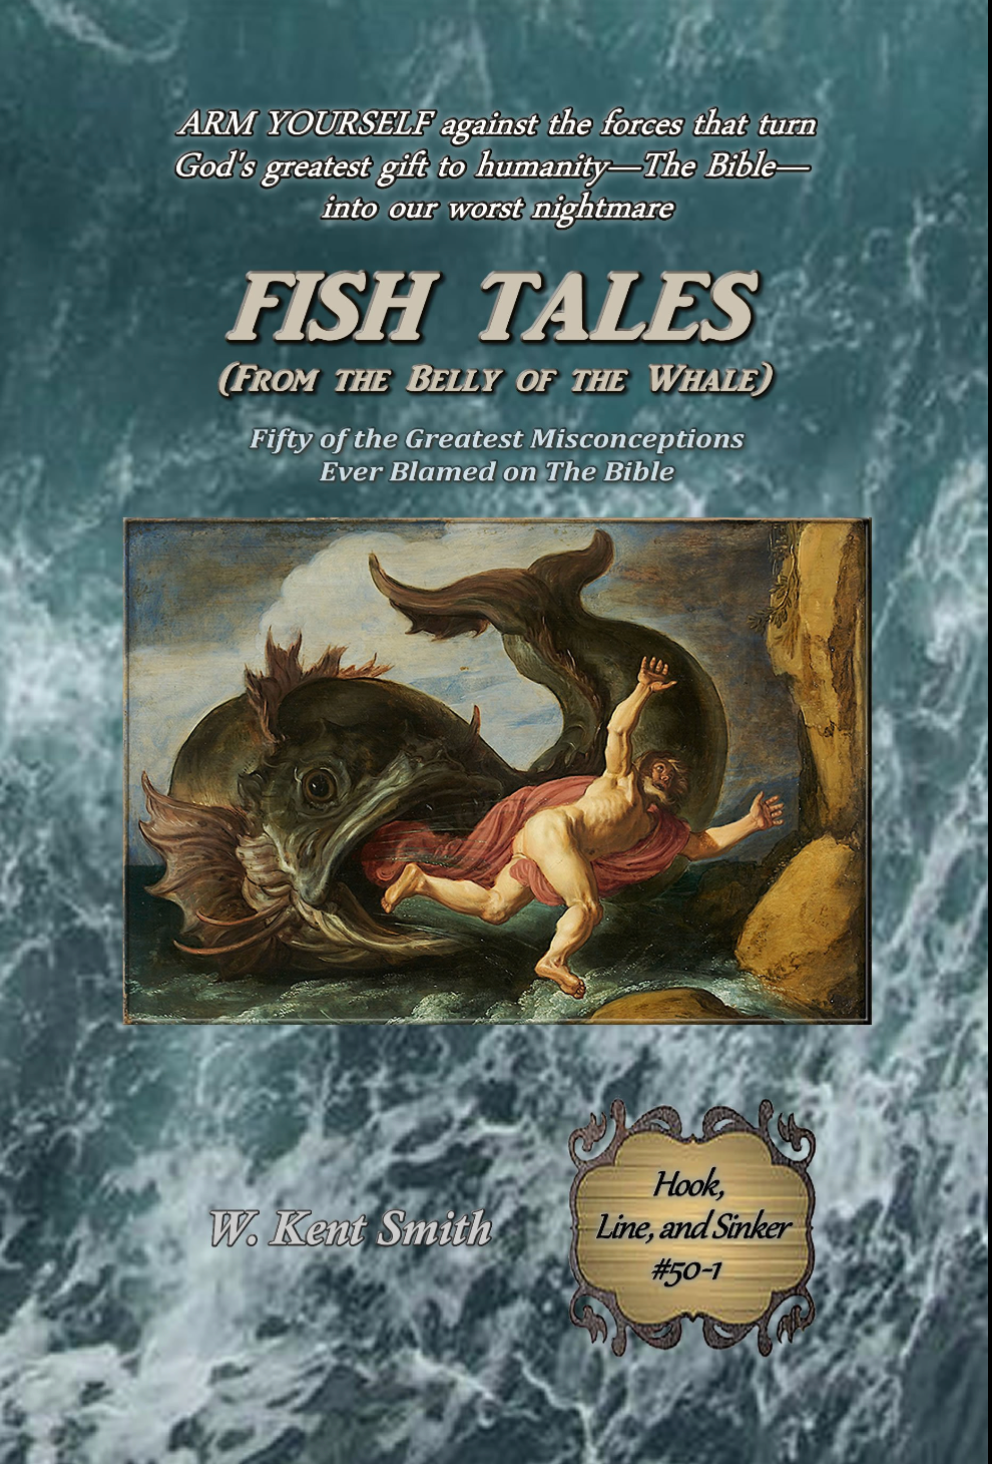 Fish Tales - From The Belly of the Whale